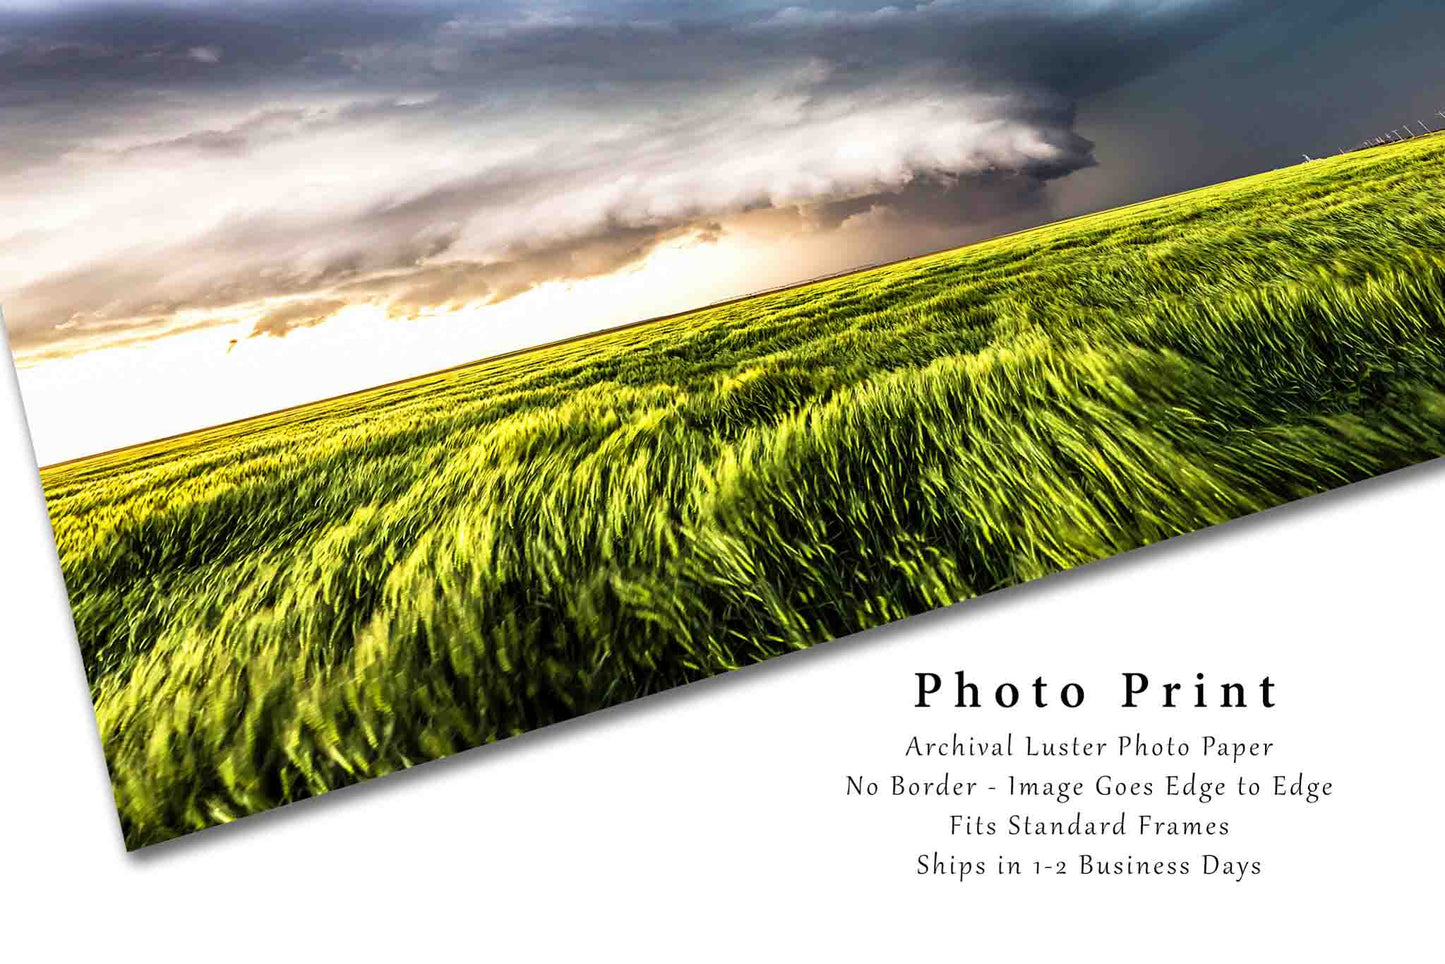 Storm Photography Print (Not Framed) Picture of Supercell Thunderstorm Over Waving Wheat Field on Stormy Spring Day in Kansas Great Plains Wall Art Weather Decor